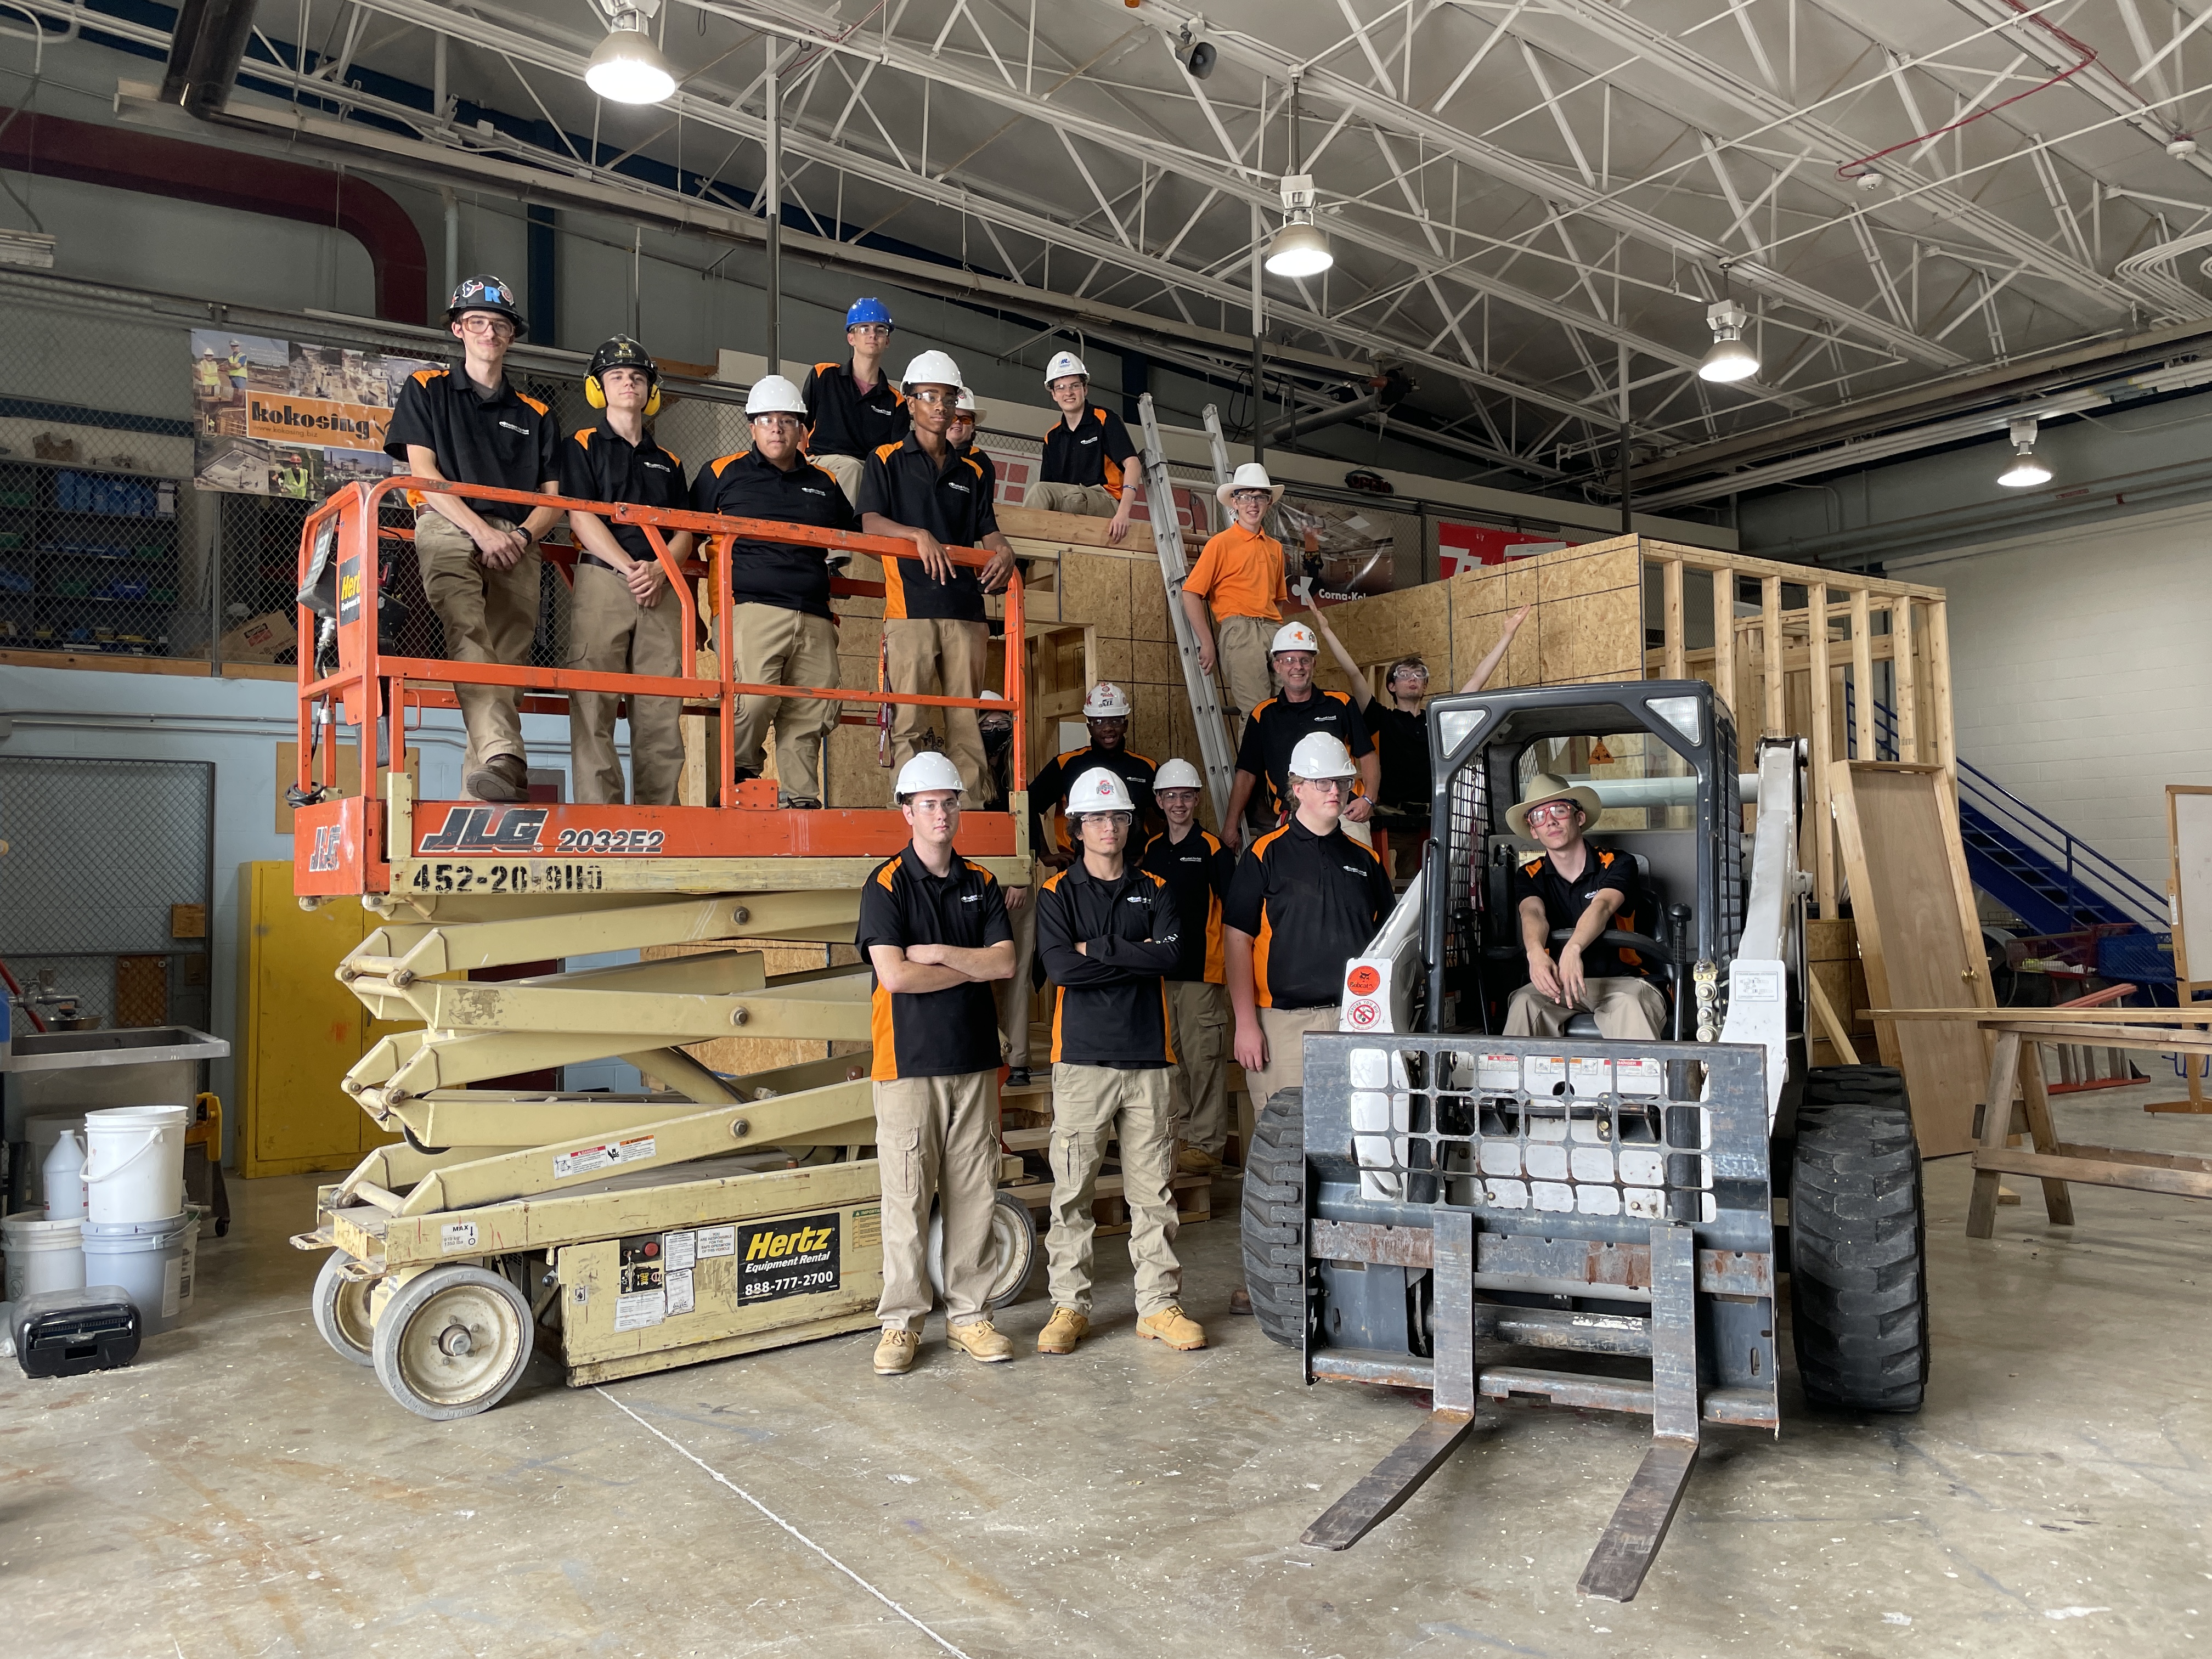 students in hardhats standing on a scissor lift and next to a fork lift